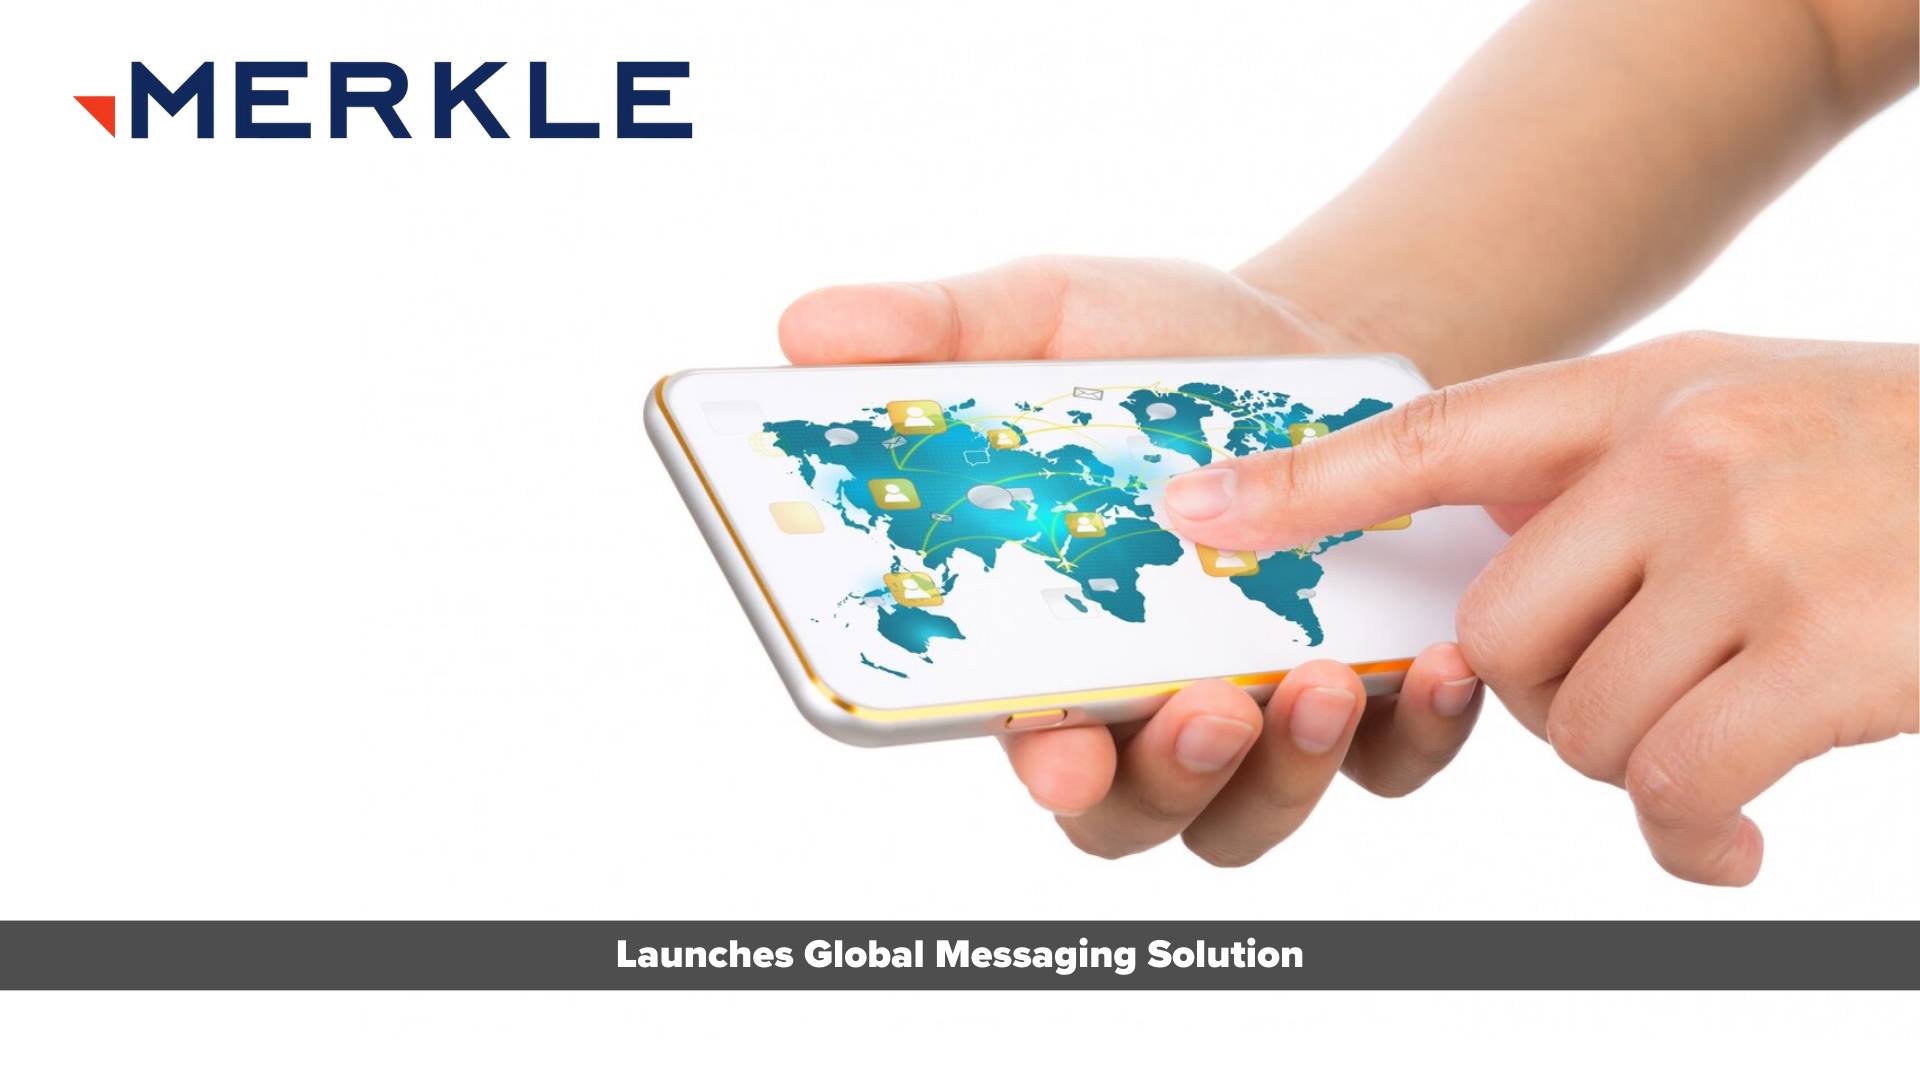 Merkle Launches Global Messaging Solution